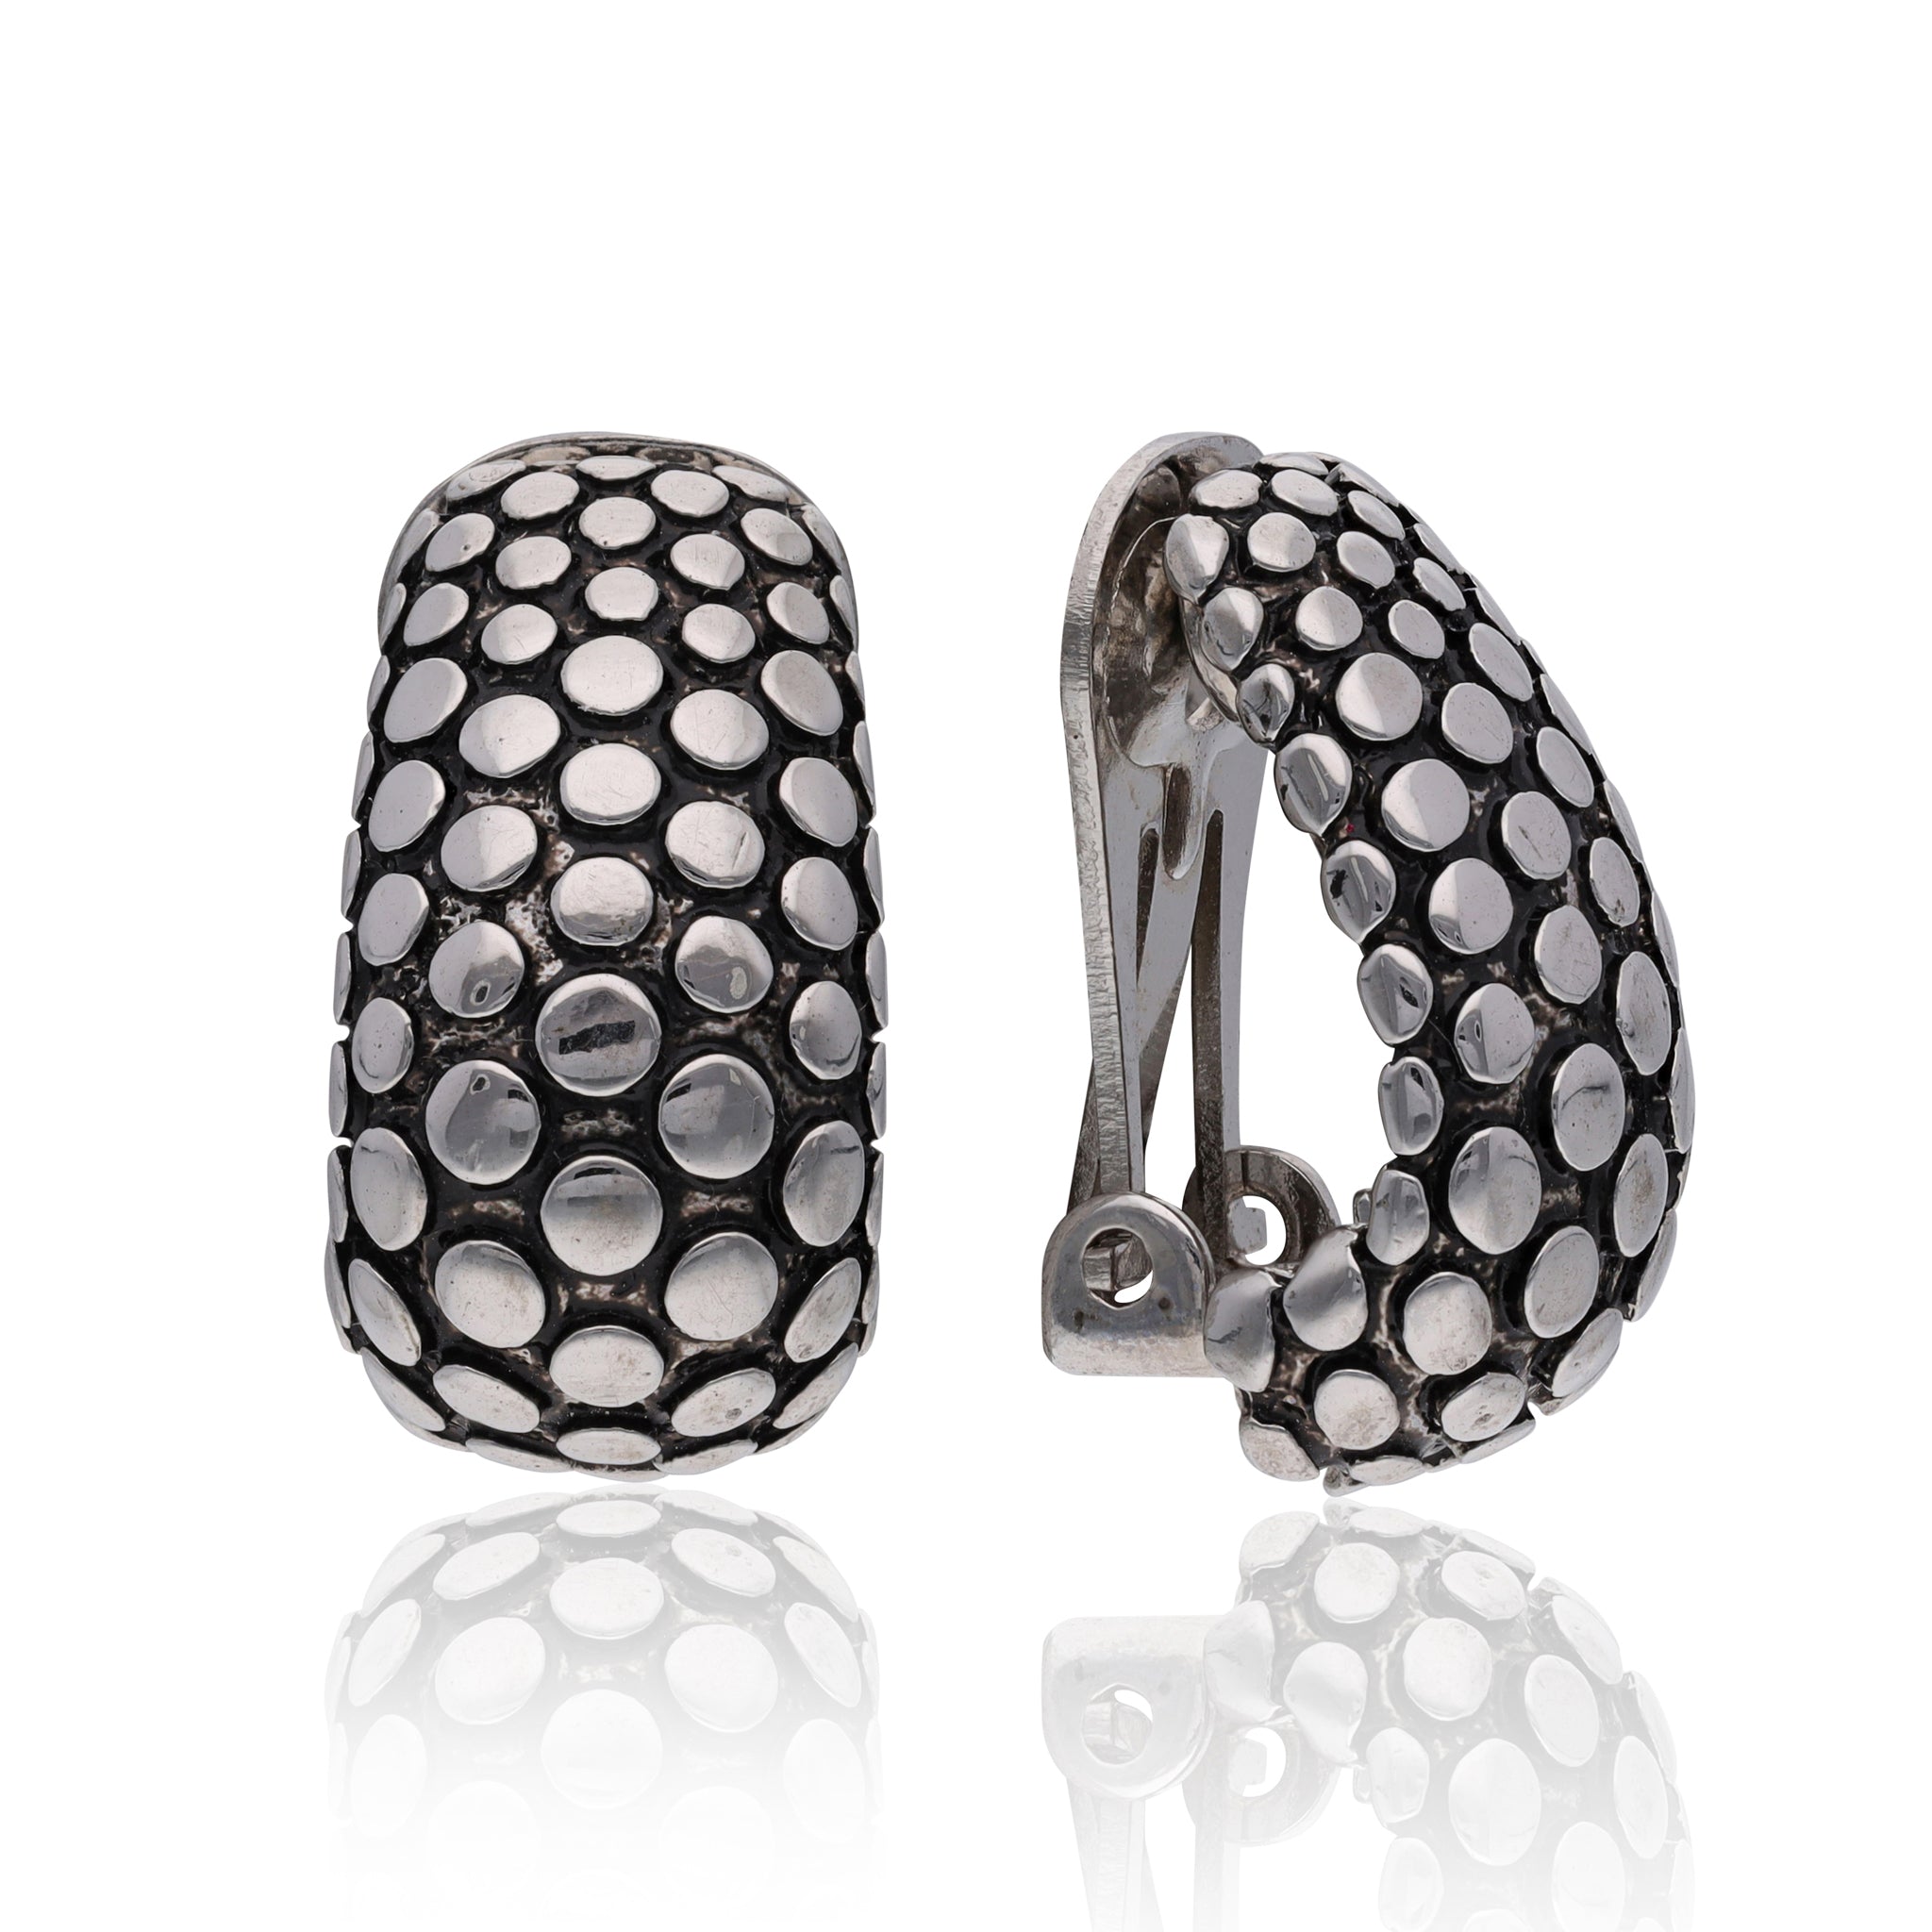 Vintage Silver Tone Dotted Ear Clips